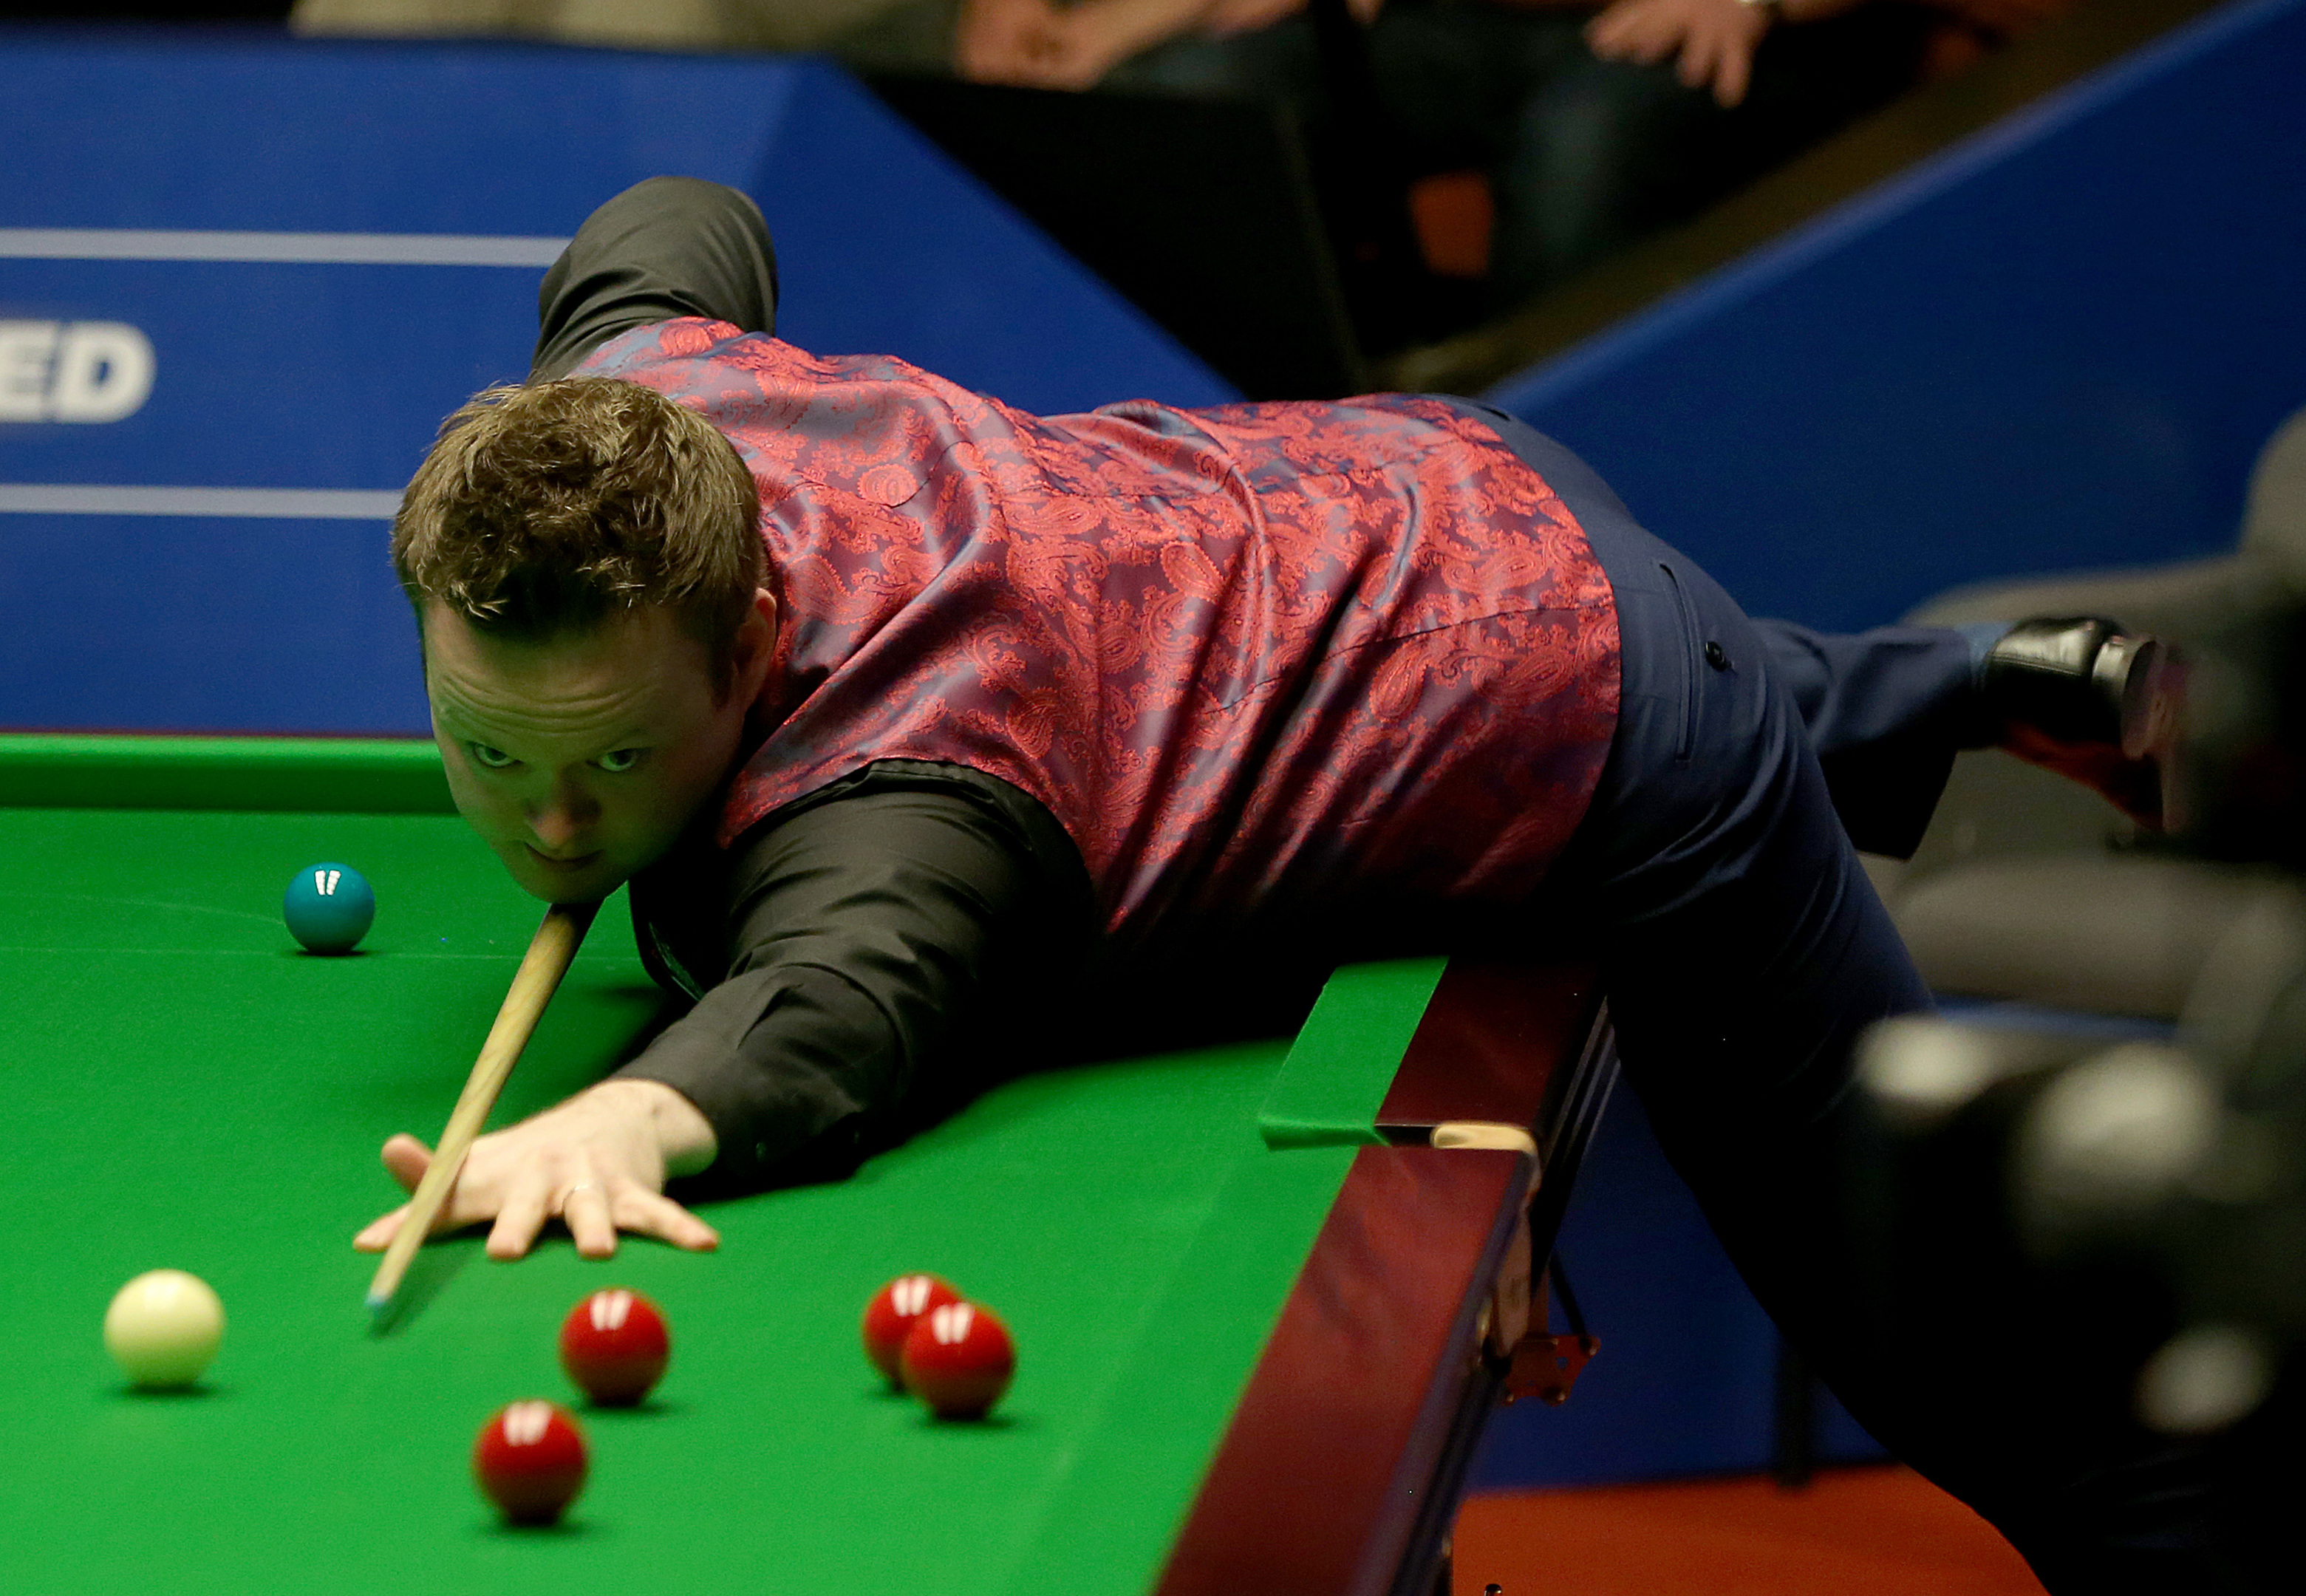 Shaun Murphy plays a shot against Ronnie O'Sullivan during their second round match of this year's World Snooker Championship.